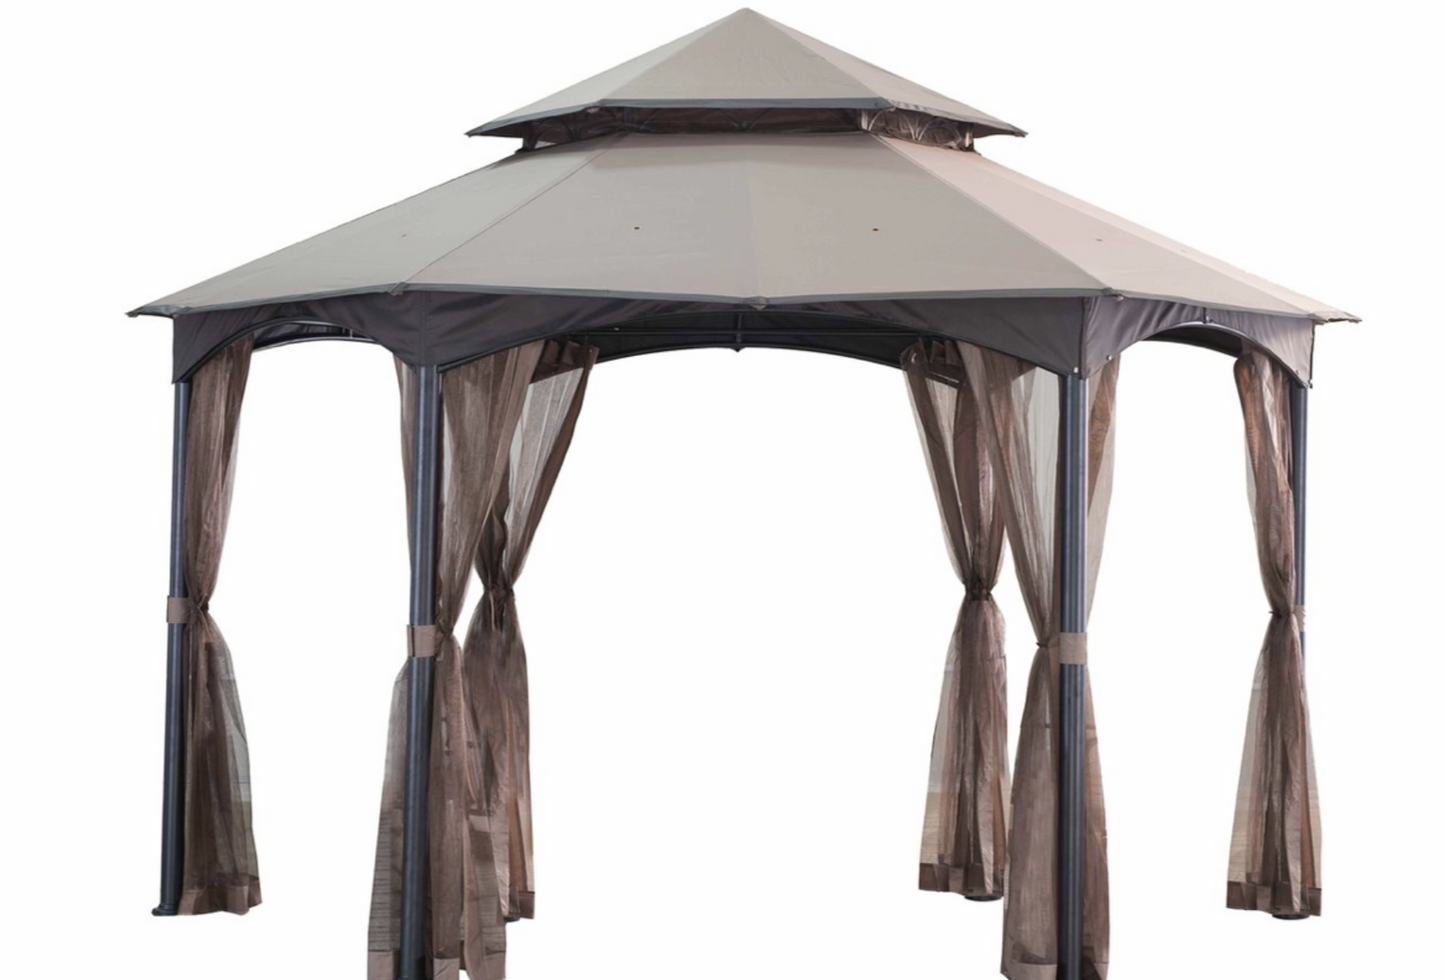 Sunjoy Khaki Replacement Canopy and netting For South Bay Hexagon Gazebo (14X14 Ft) L-GZ793PST-A Sold At BigLots